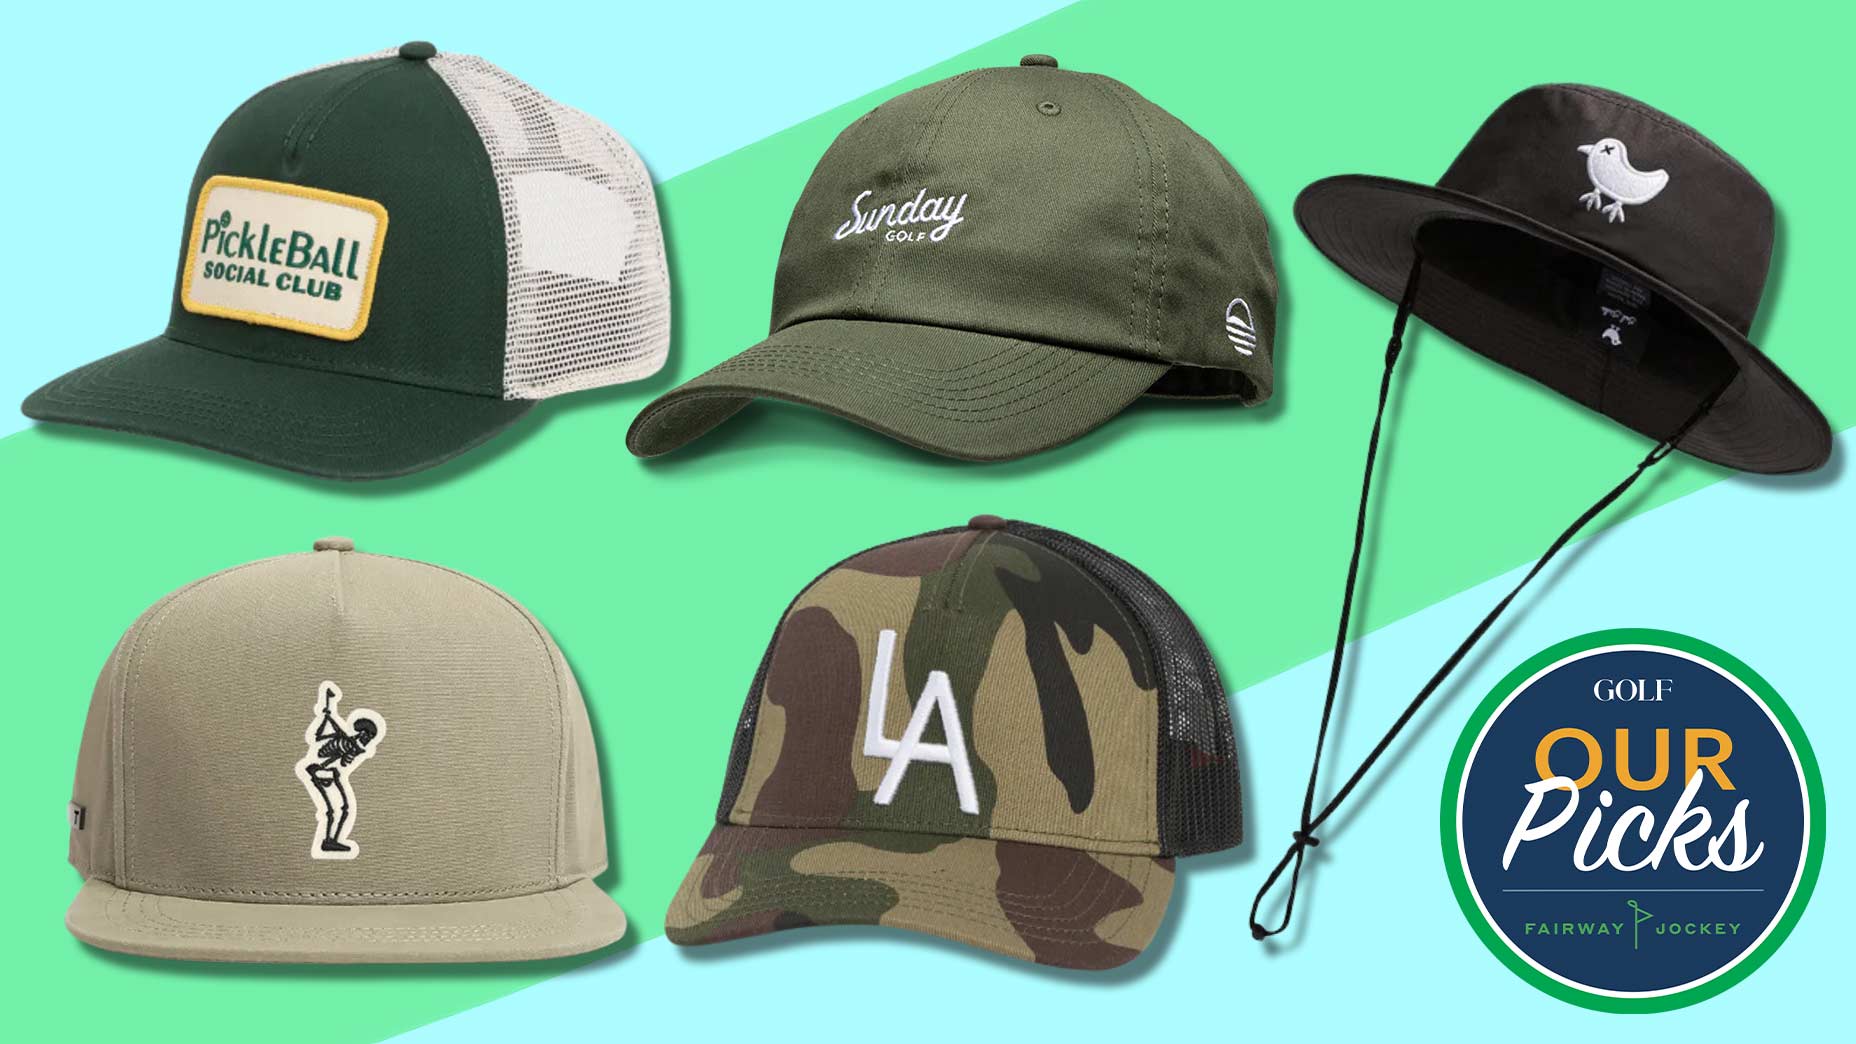 7 GOLF staff favorite hats of 2023: Our Picks